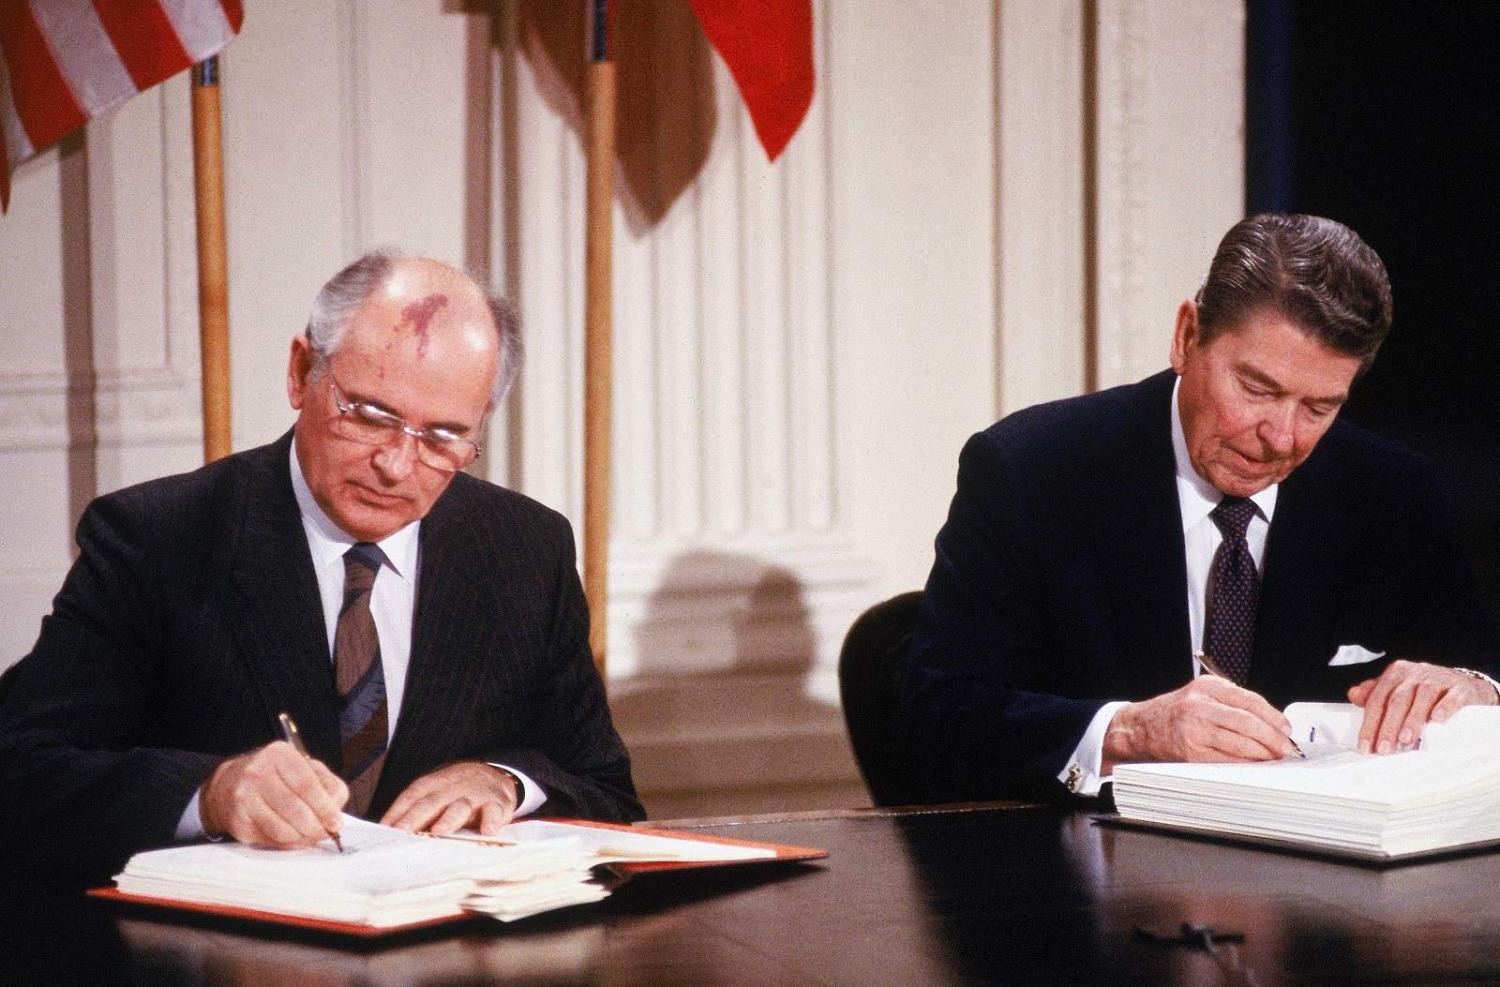 Soviet leader Mikhail Gorbachev and his summit host US President Ronald Reagan signing the Intermediate-Range Nuclear Forces Treaty, 1987 (Dirck Halstead/Getty Images)